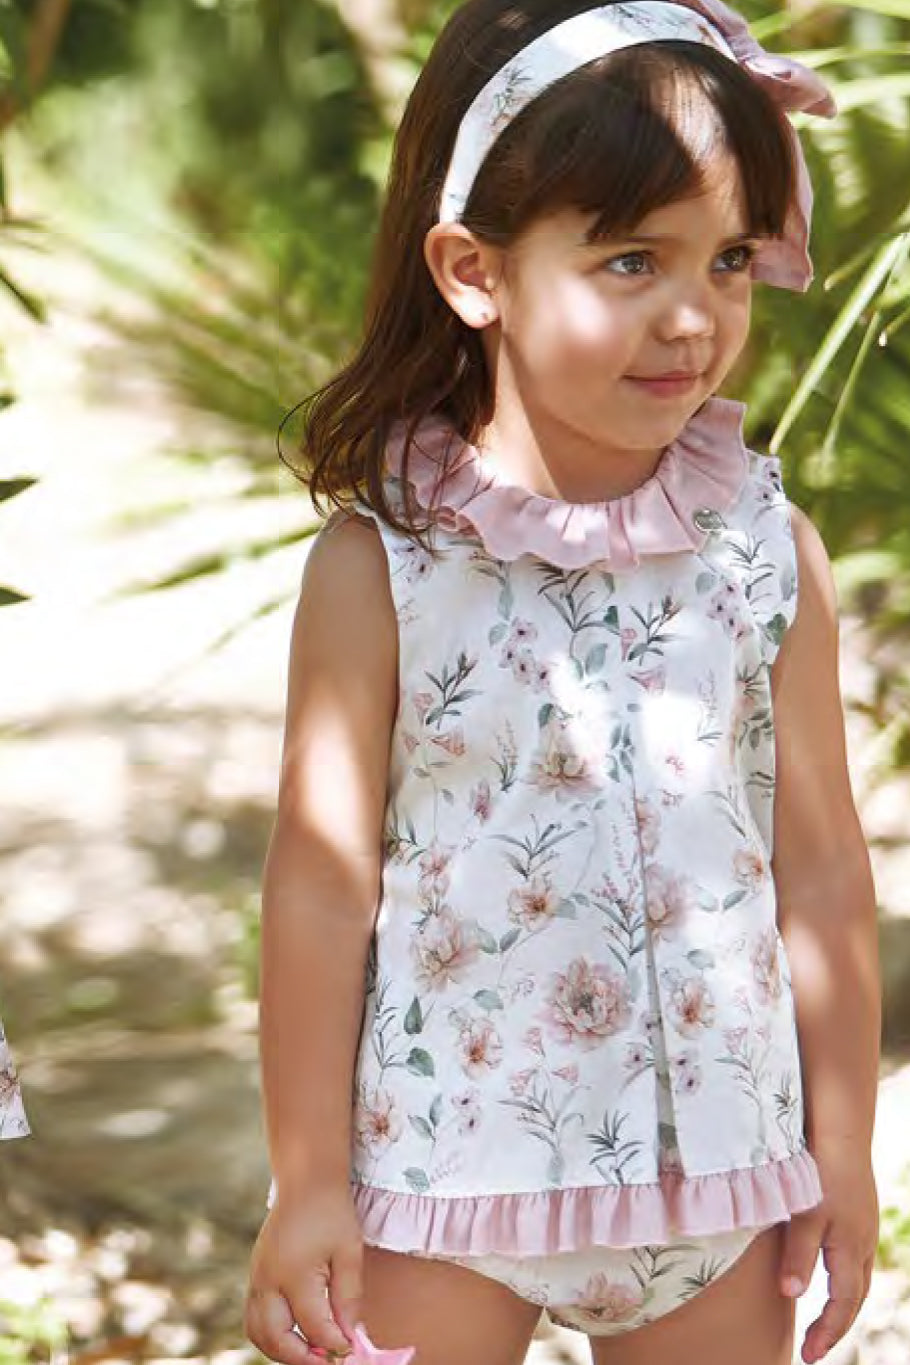 Juliana "Zora" Dusky Pink Floral Blouse & Bloomers | Millie and John